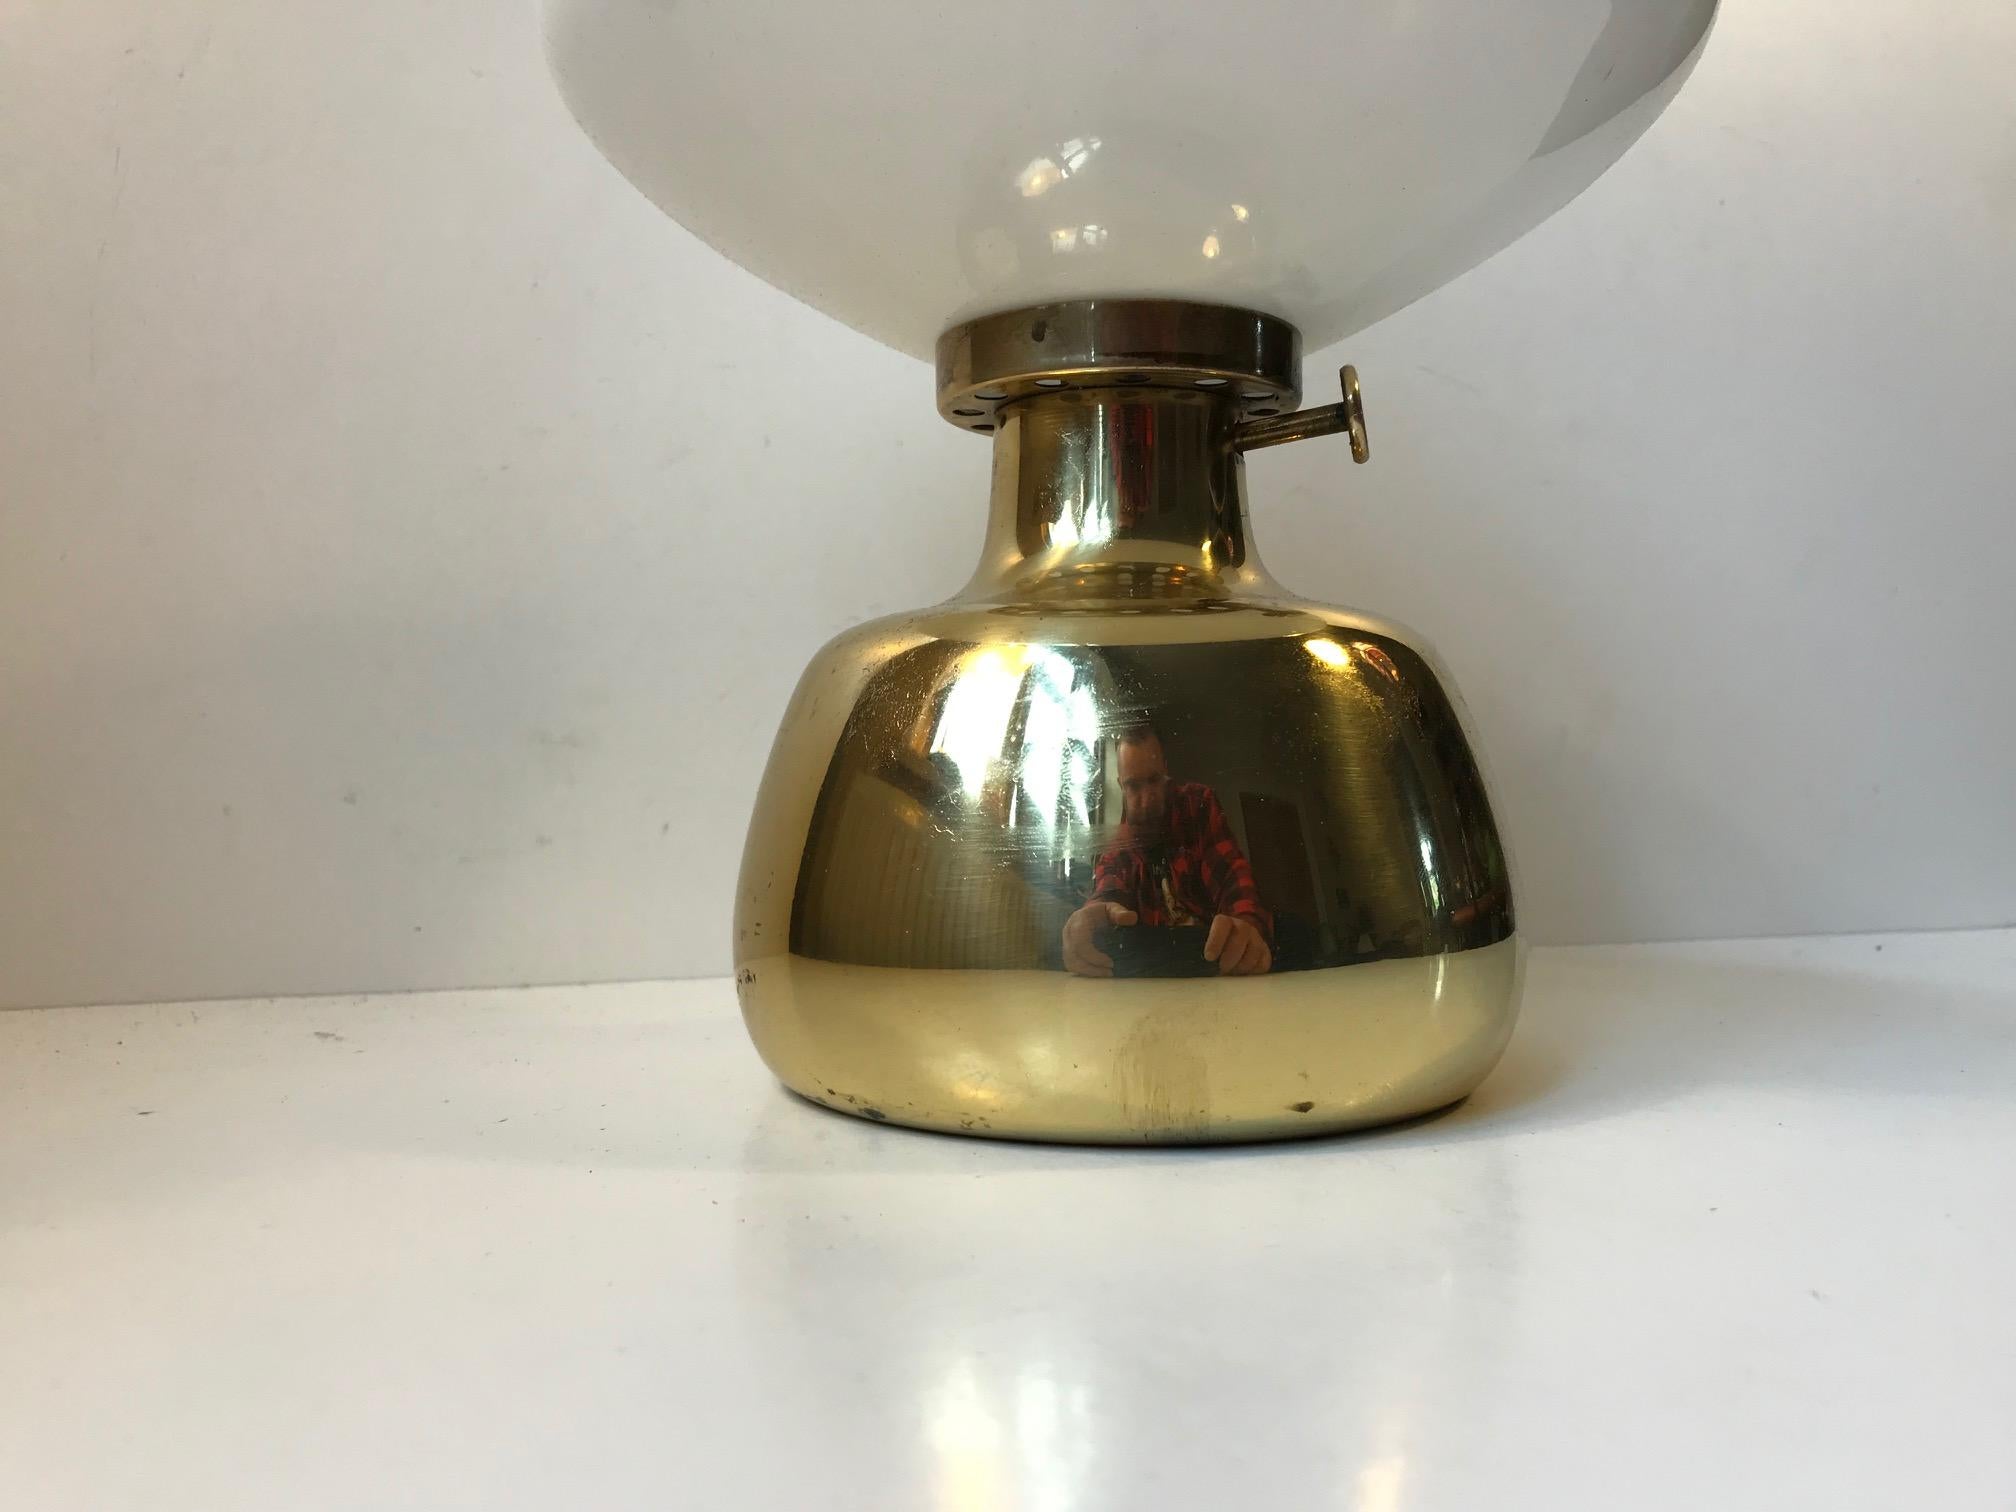 - Designed by Henning Koppel (1918-81) in the 1960s
- Manufactured by Louis Poulsen in Denmark
- The Petronella oil lamp is made from brass with an opaline glass shade.